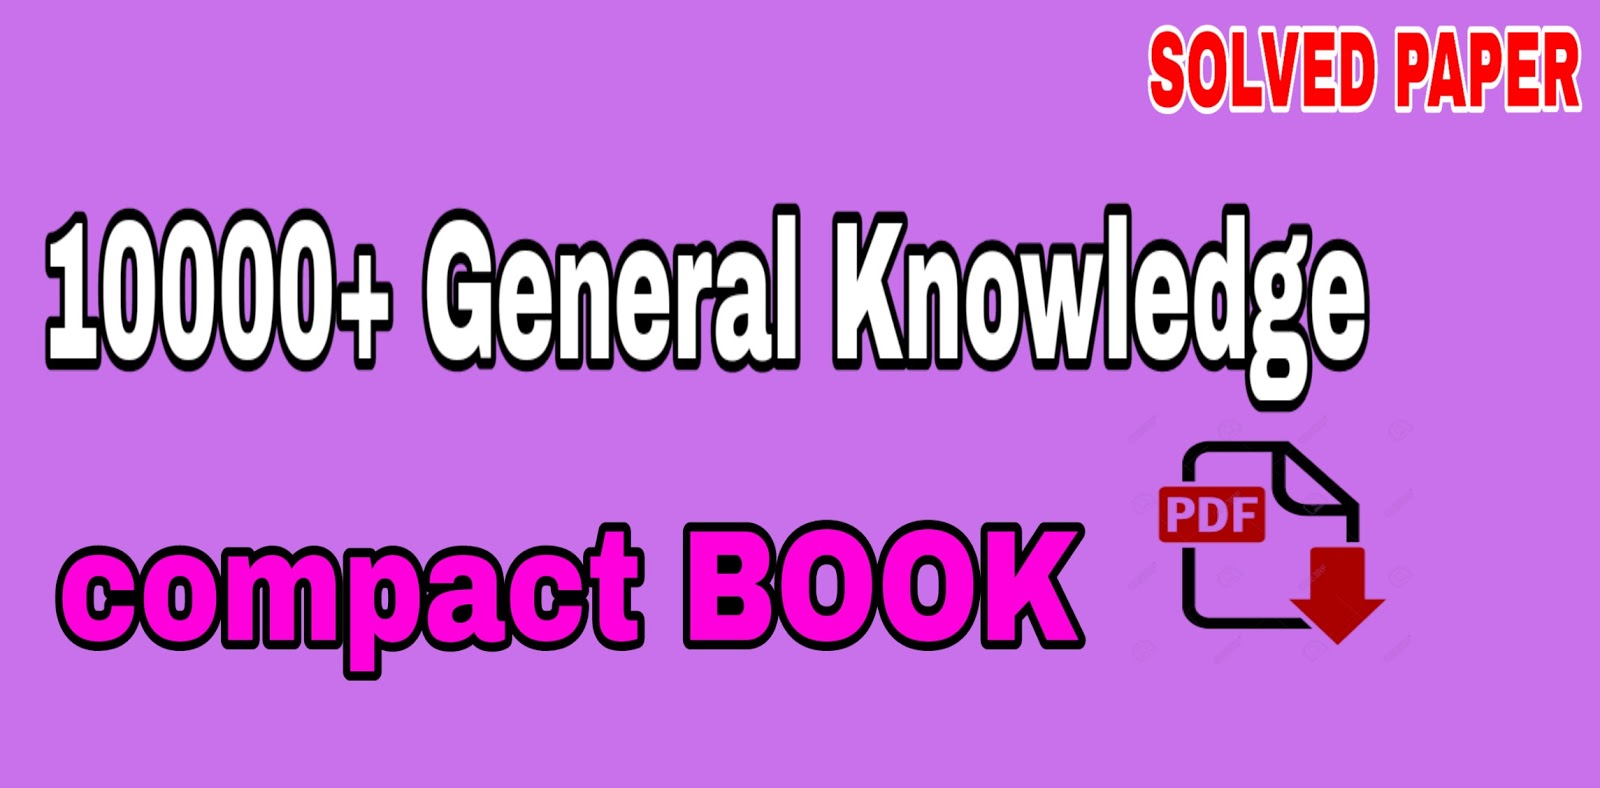 10000+General Knowledge (GK) PDF 2019||General Knowledge for railway , wbcs , psc ,ssc ,banking ...